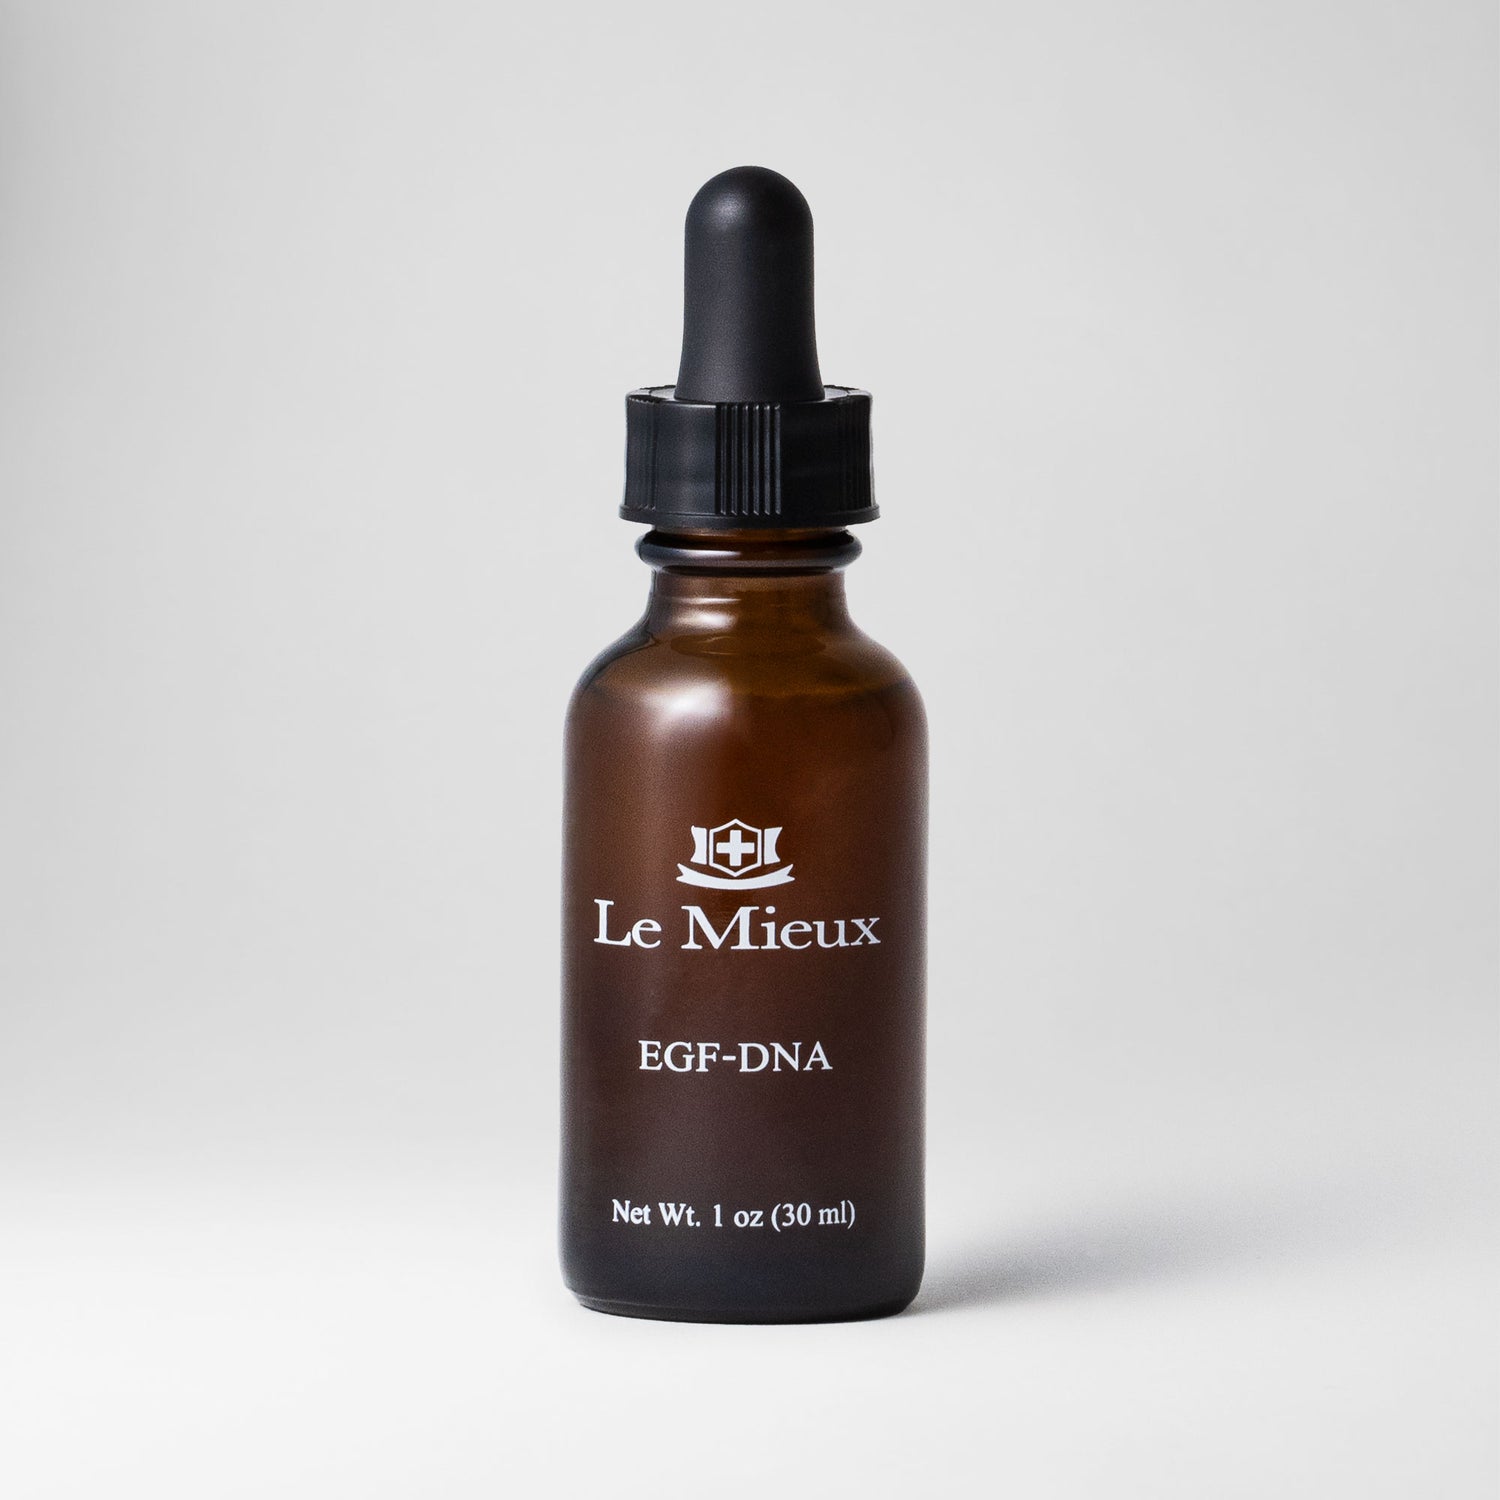  EGF-DNA from Le Mieux Skincare - 1